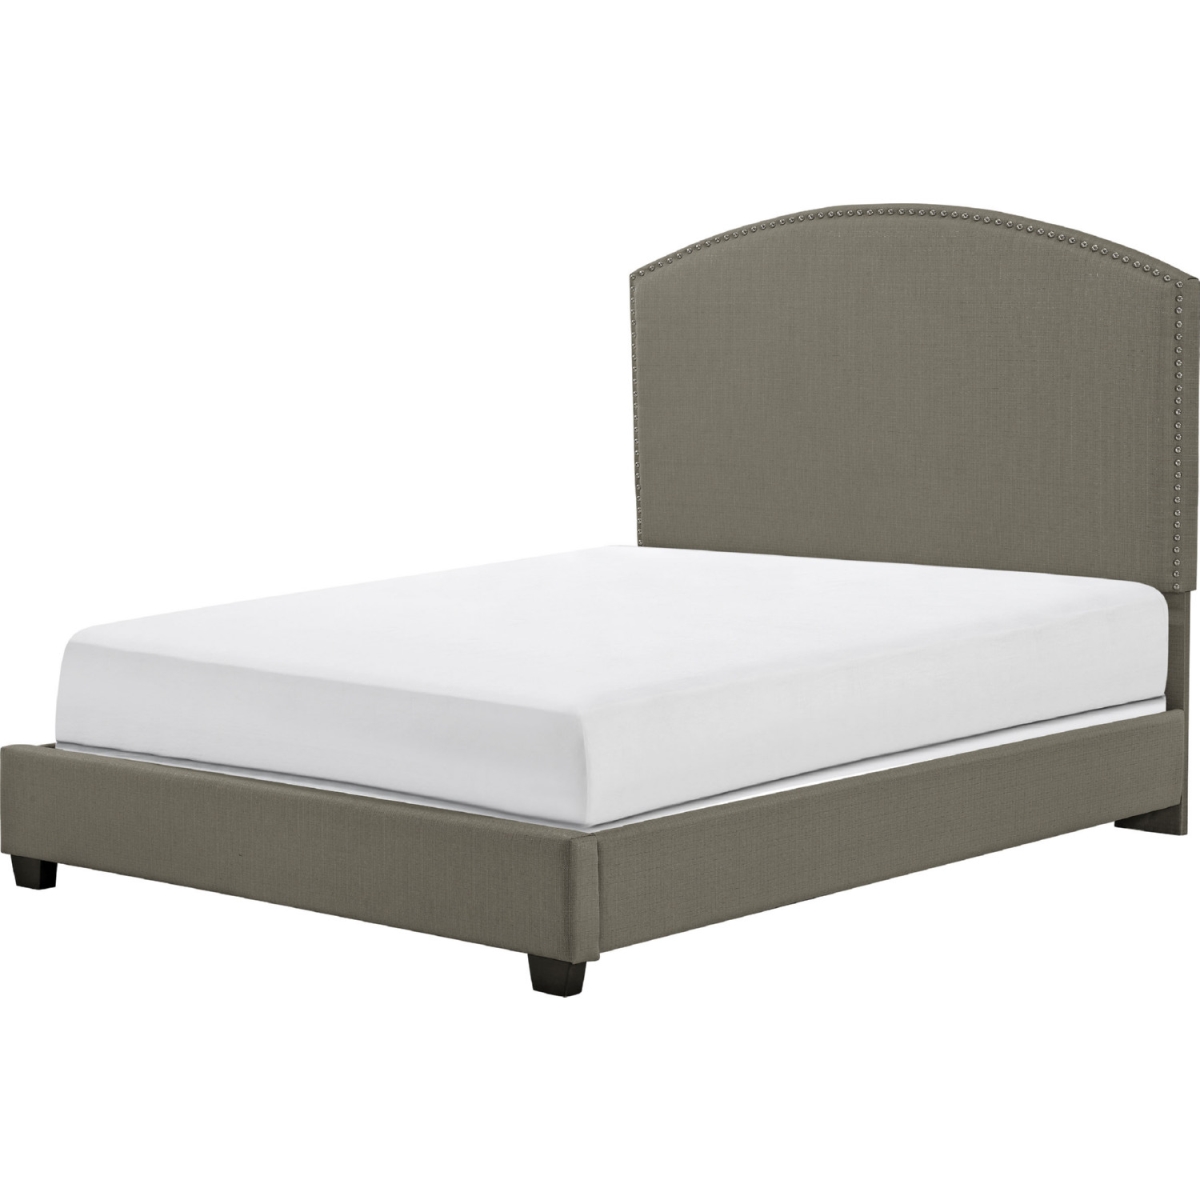 Kf705008sh Cassie Curved Upholstered Queen Bedset, Shadow Gray Linen